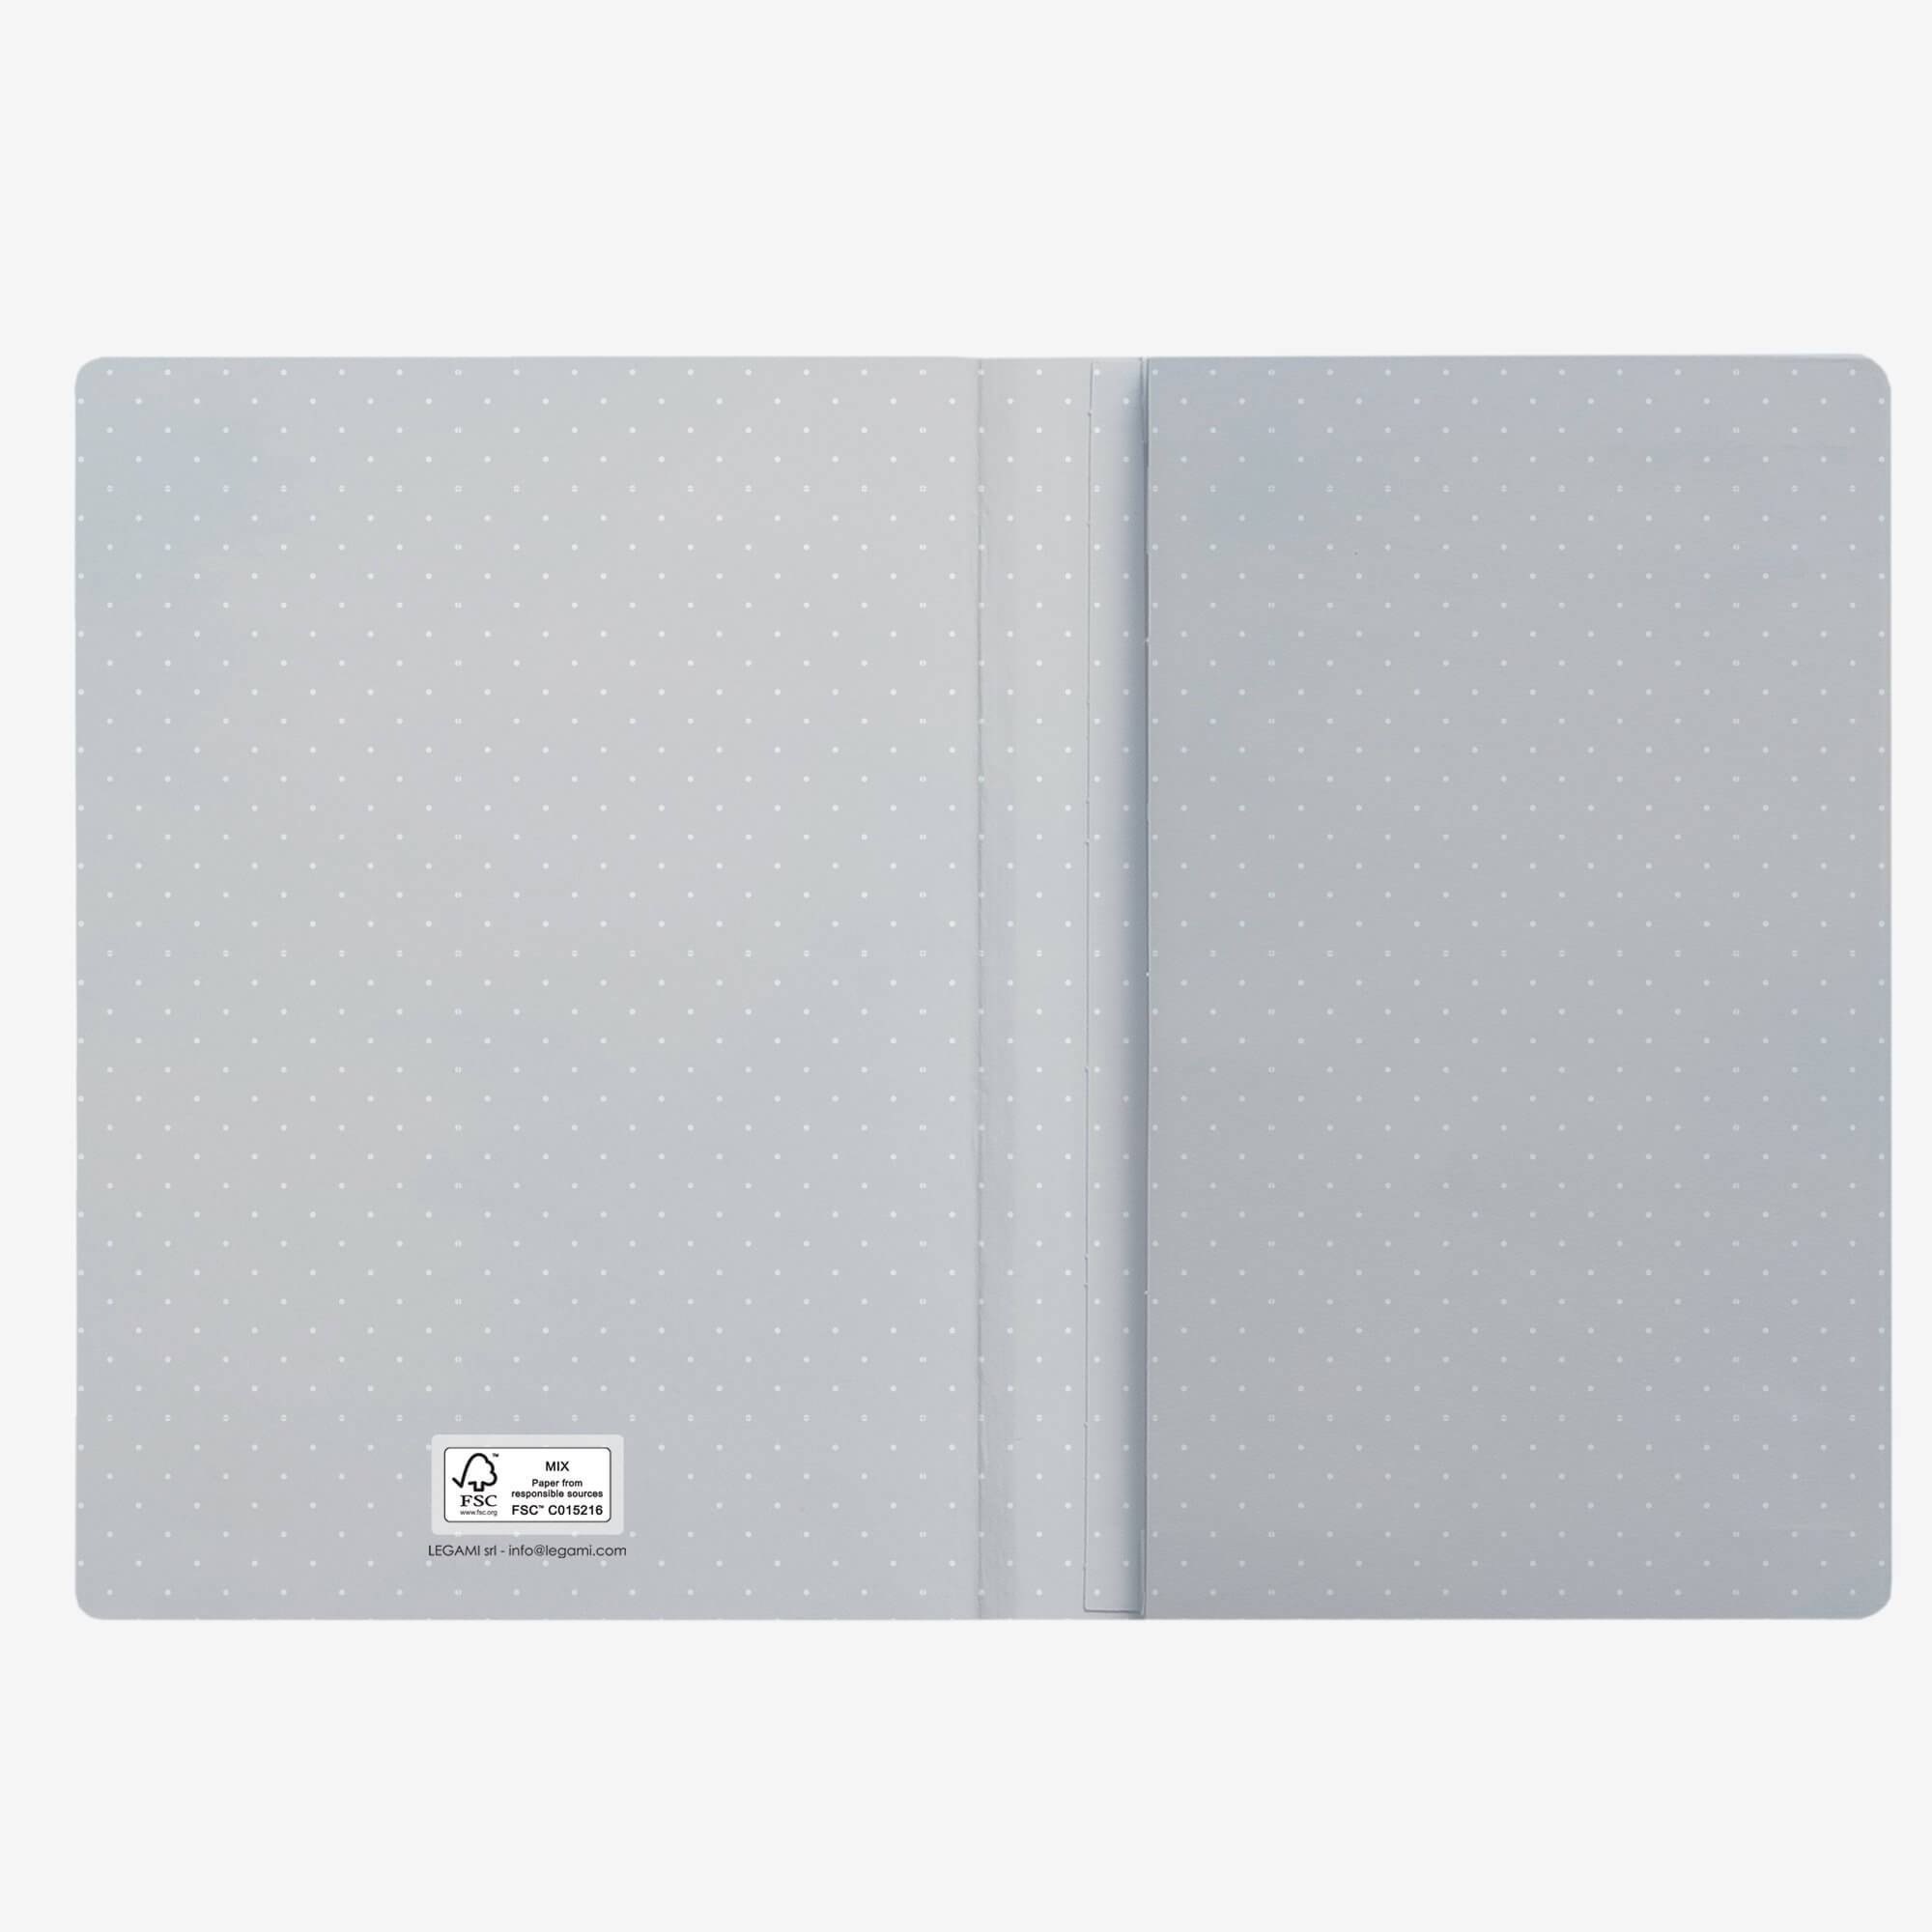 Notebook M Kitten- Carnet 164 pages Legami 